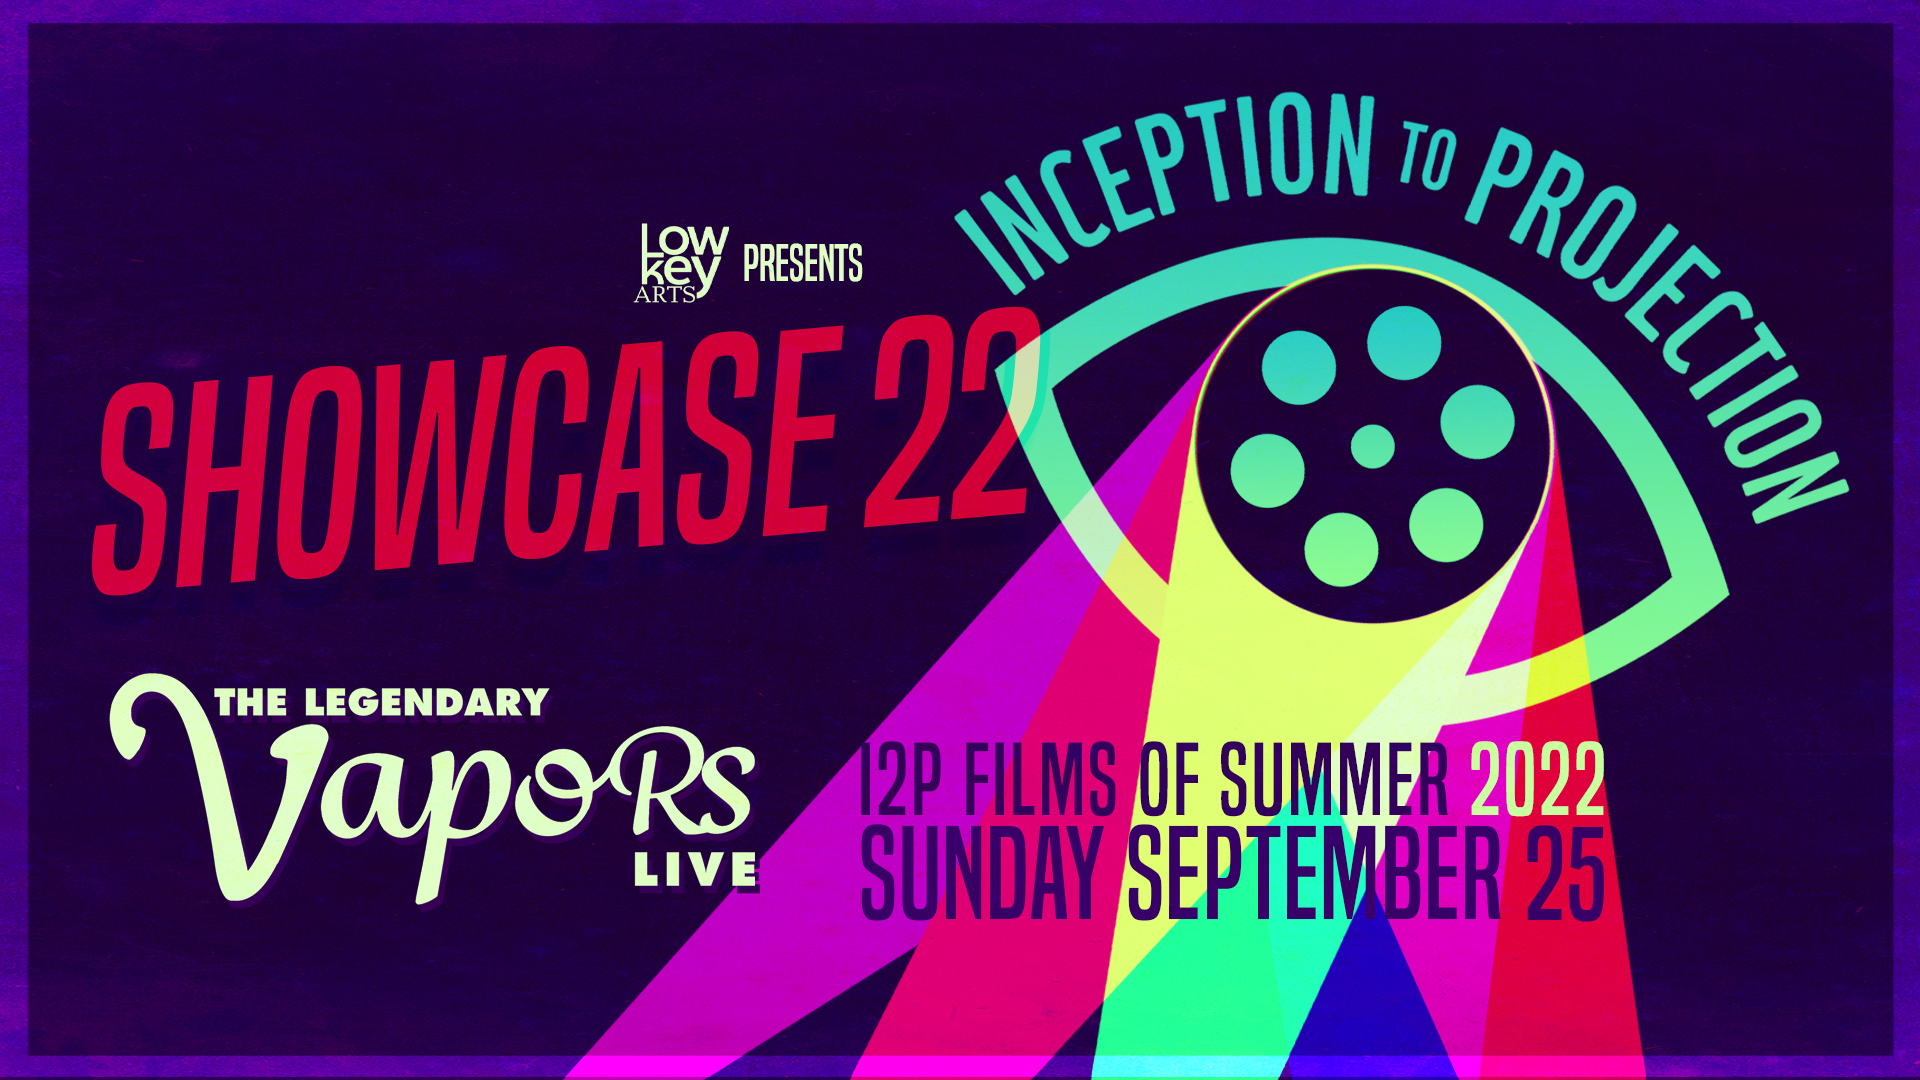 Flyer for Low Key Arts Presents Inception to Projection Showcase 2022. Inception to Projection films of summer 2022, Sunday, September 25, 2022 at The Vapors Live, 315 Park Avenue in Hot Springs, Arkanas.